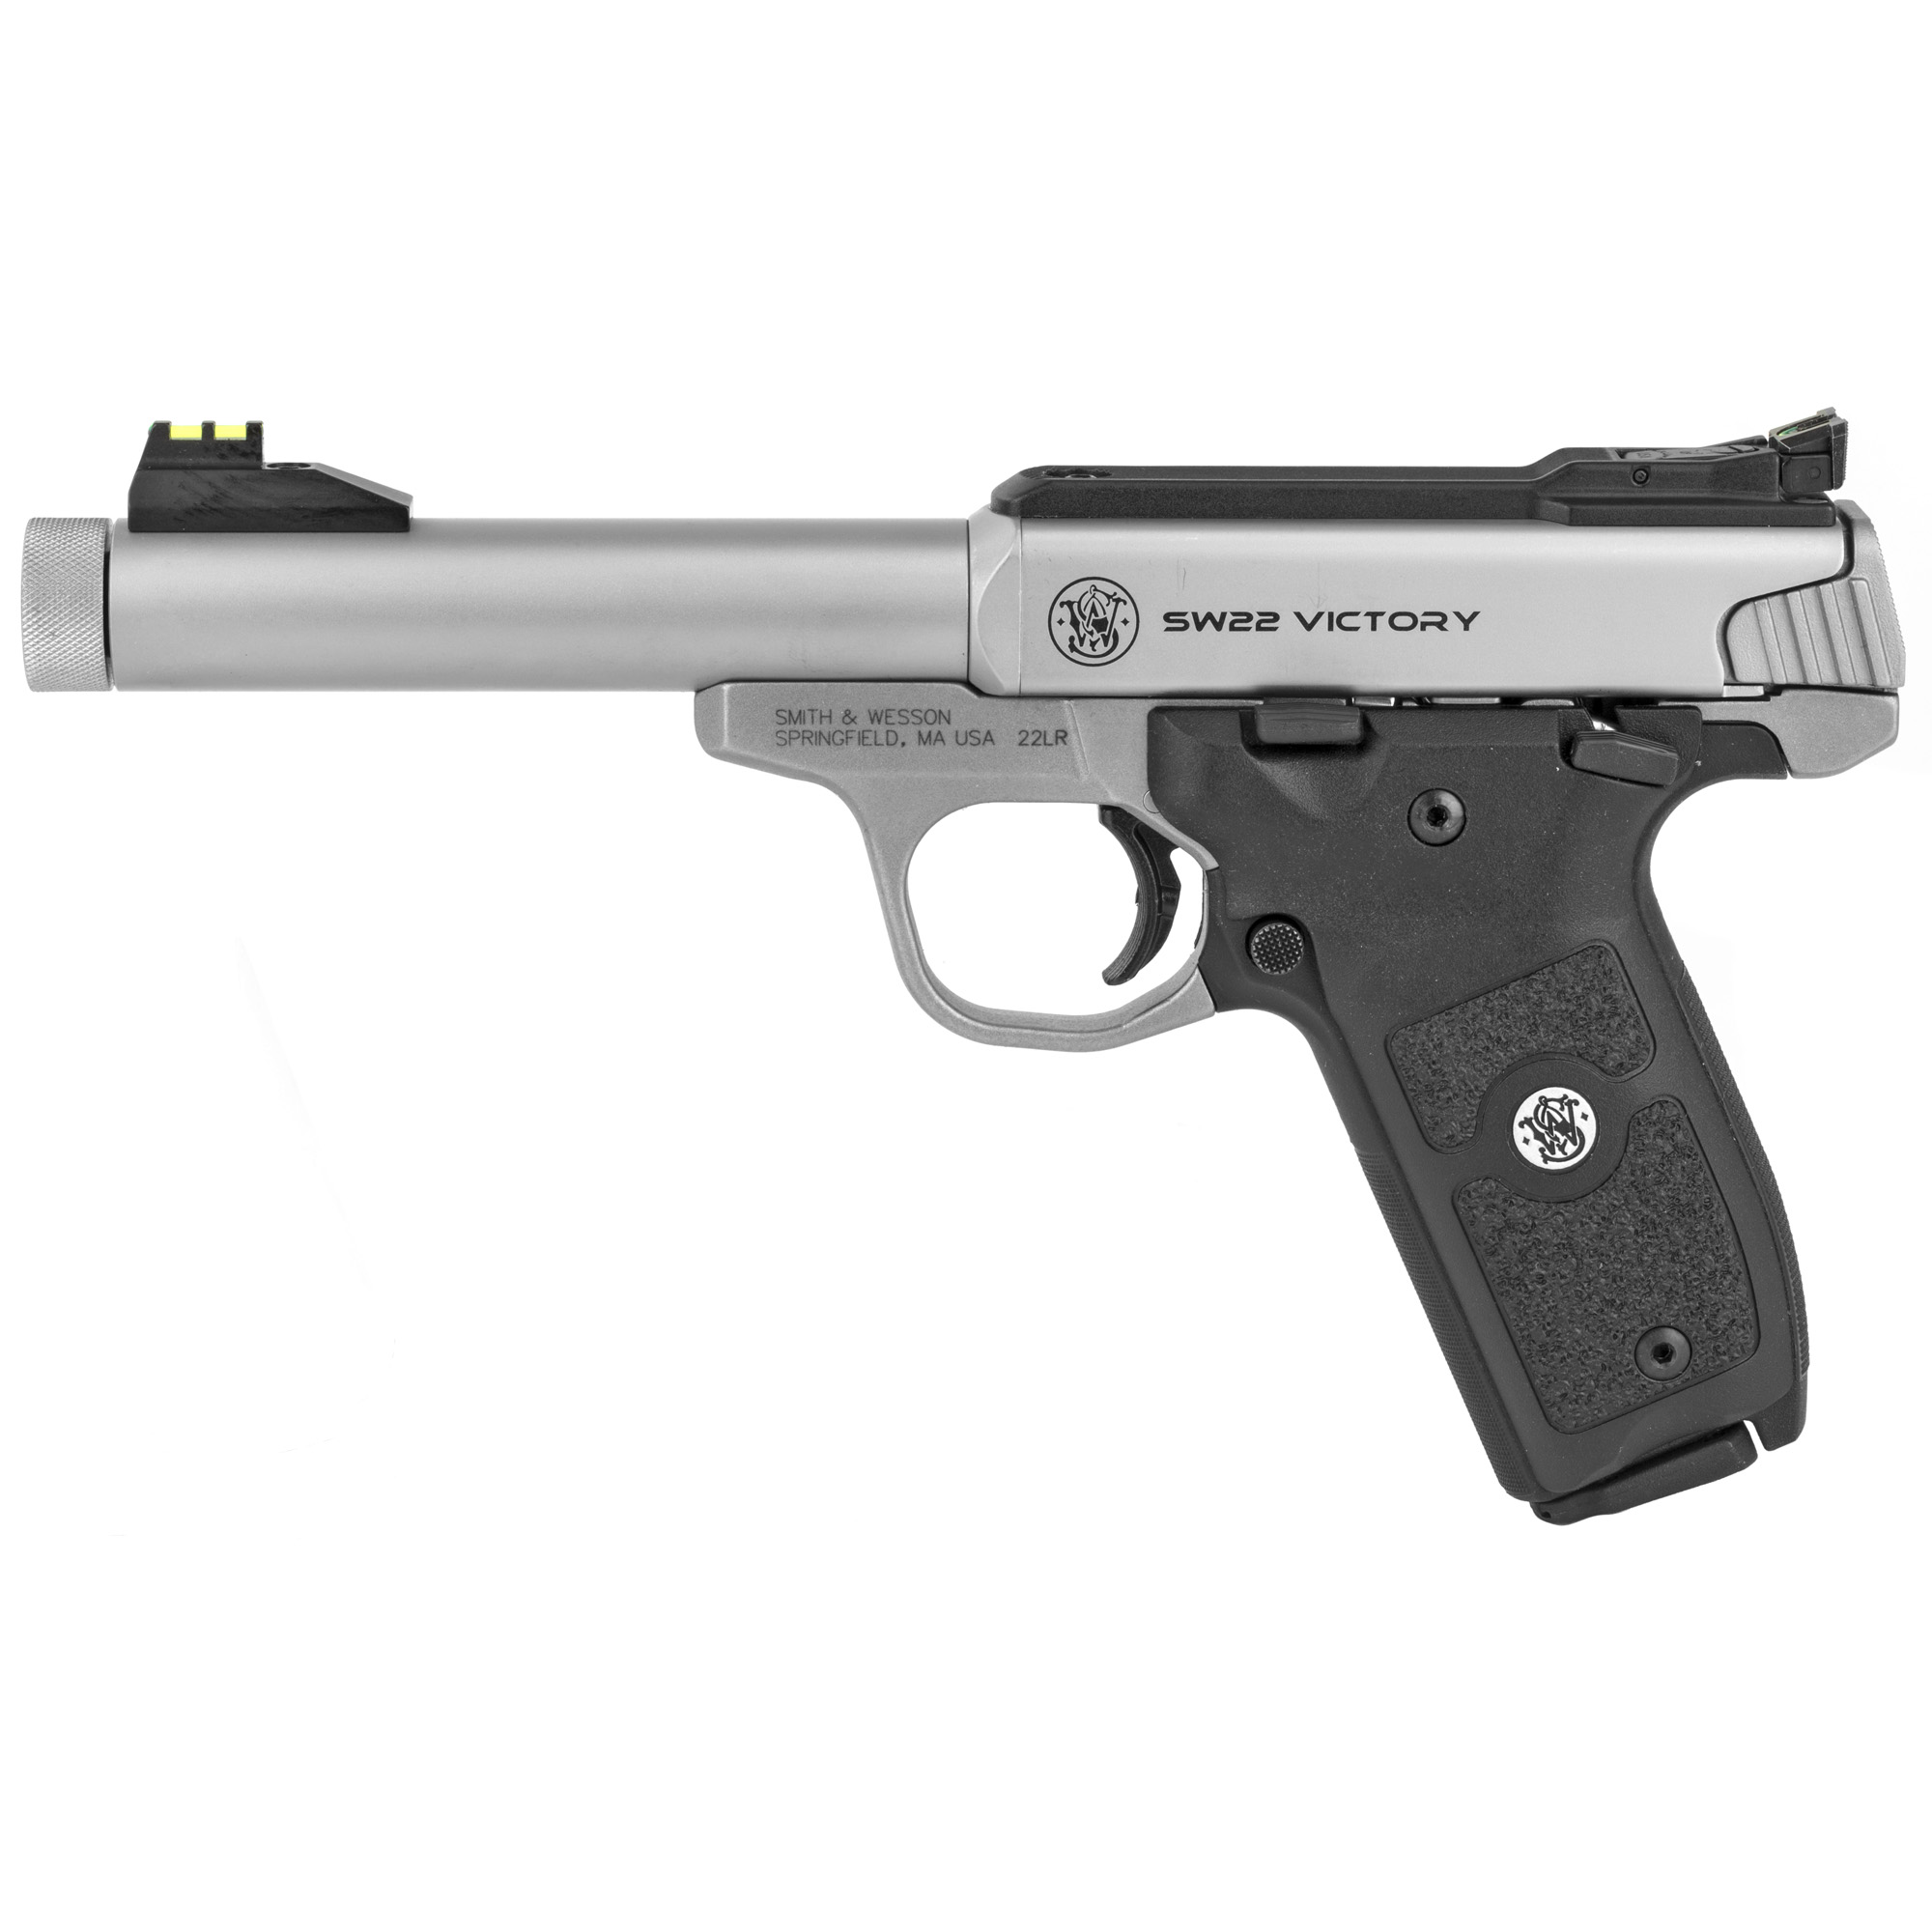 Smith & Wesson 10201 SW22 Victory 22 LR 5.50